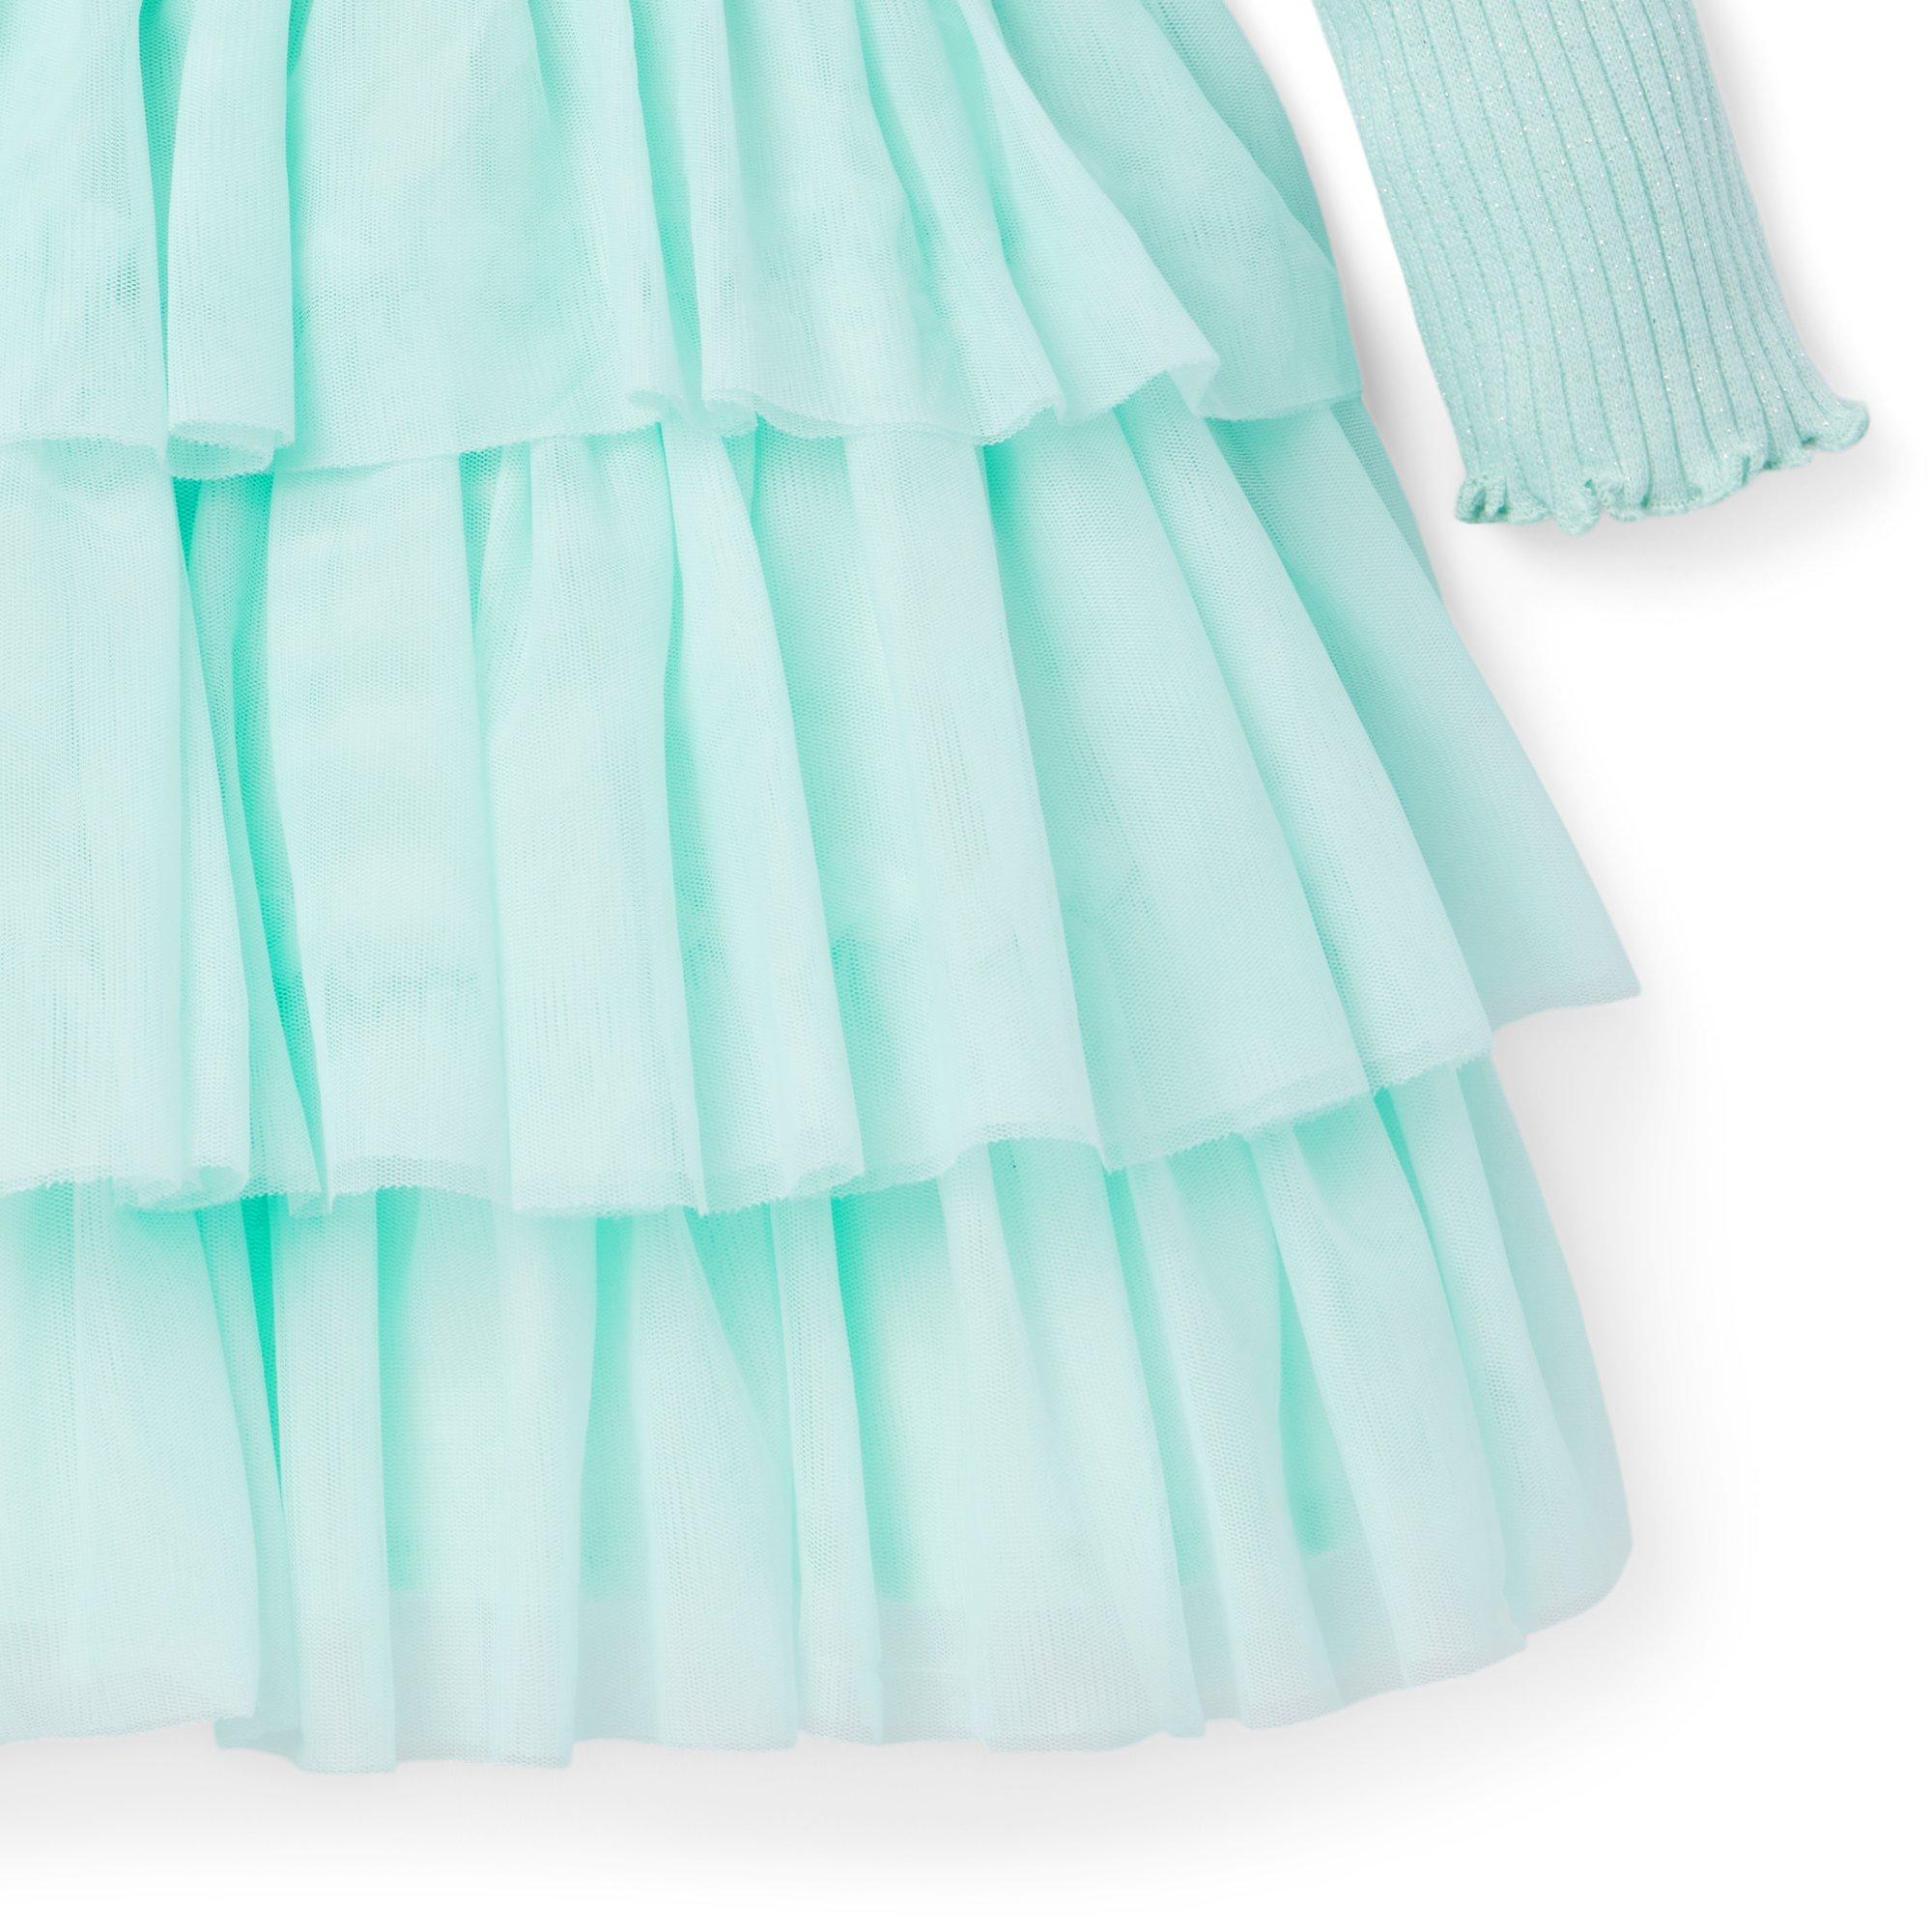 Tiered Tulle Dress